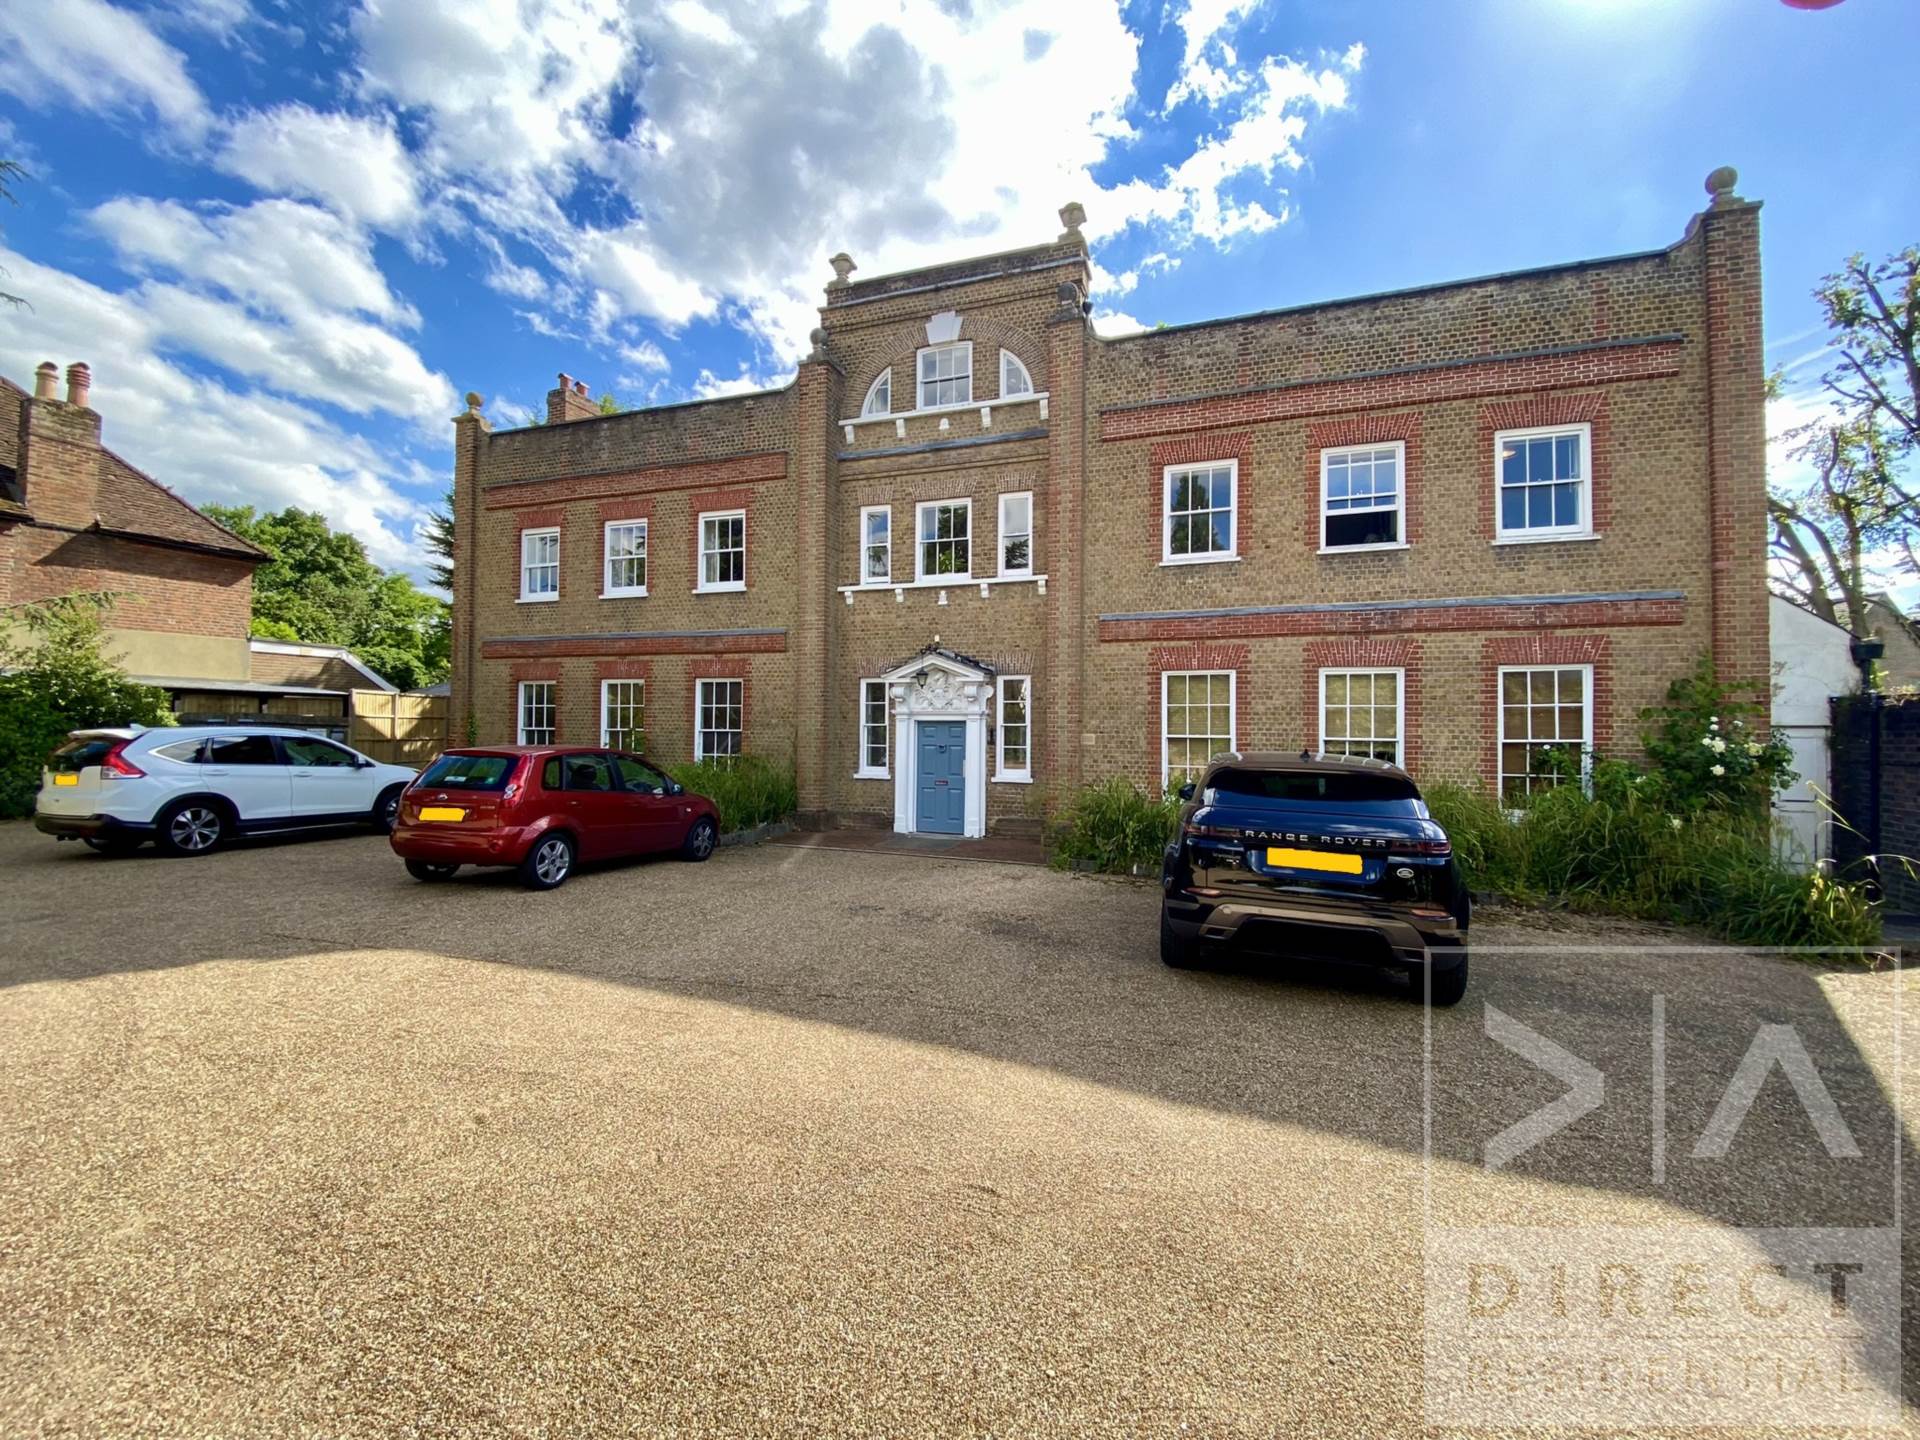 1 bed Apartment for rent in Epsom. From Direct Residential - Epsom